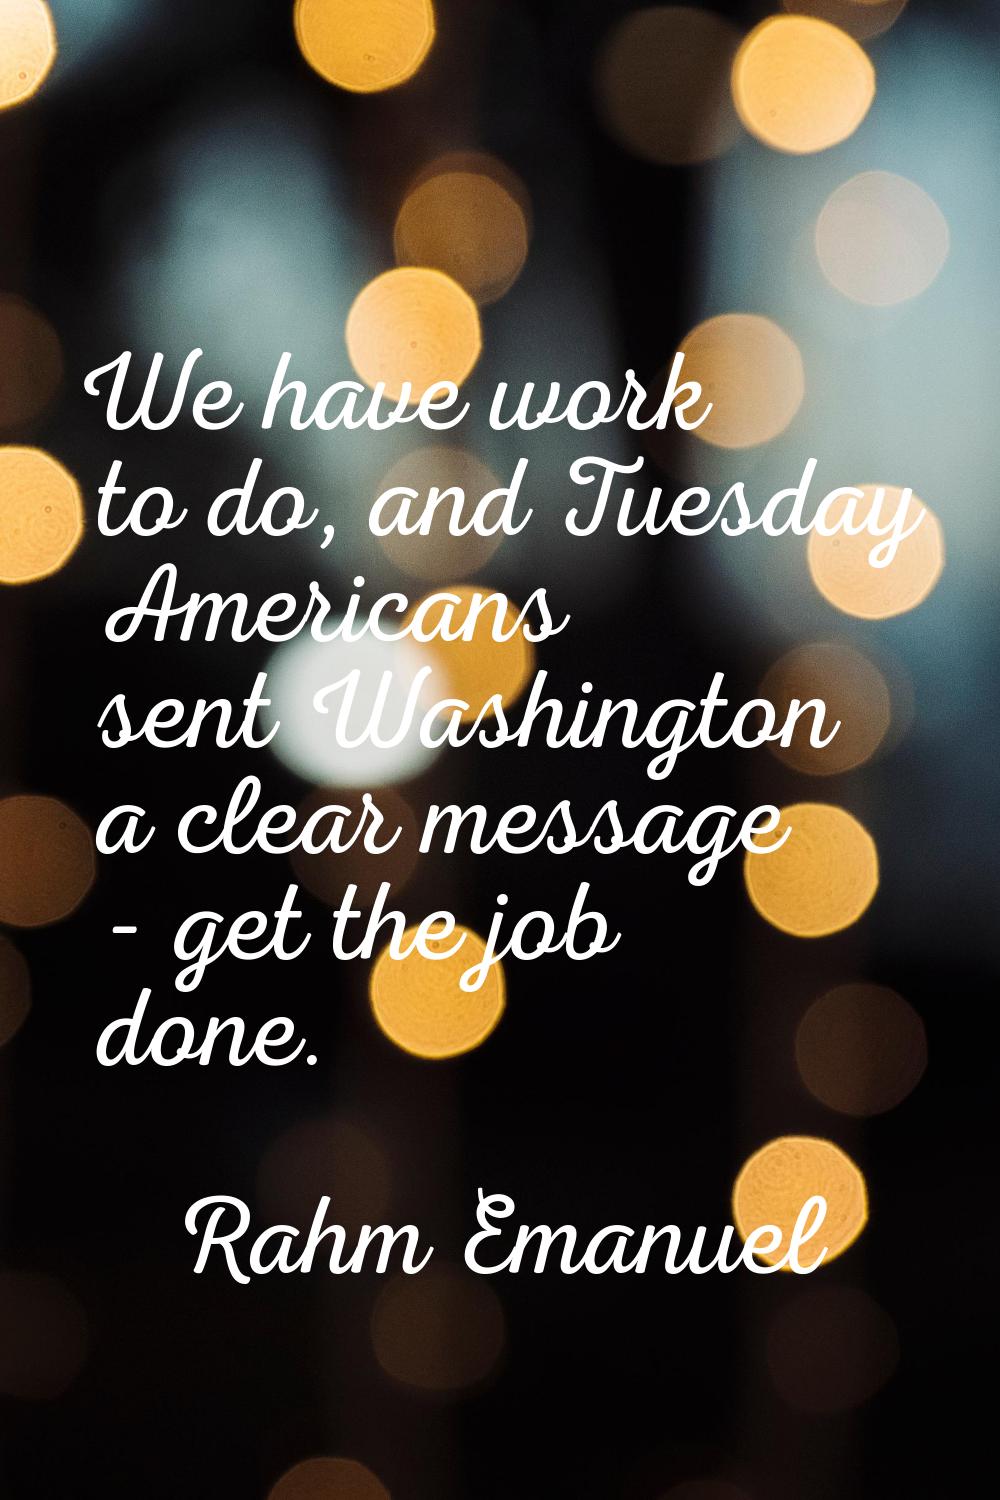 We have work to do, and Tuesday Americans sent Washington a clear message - get the job done.